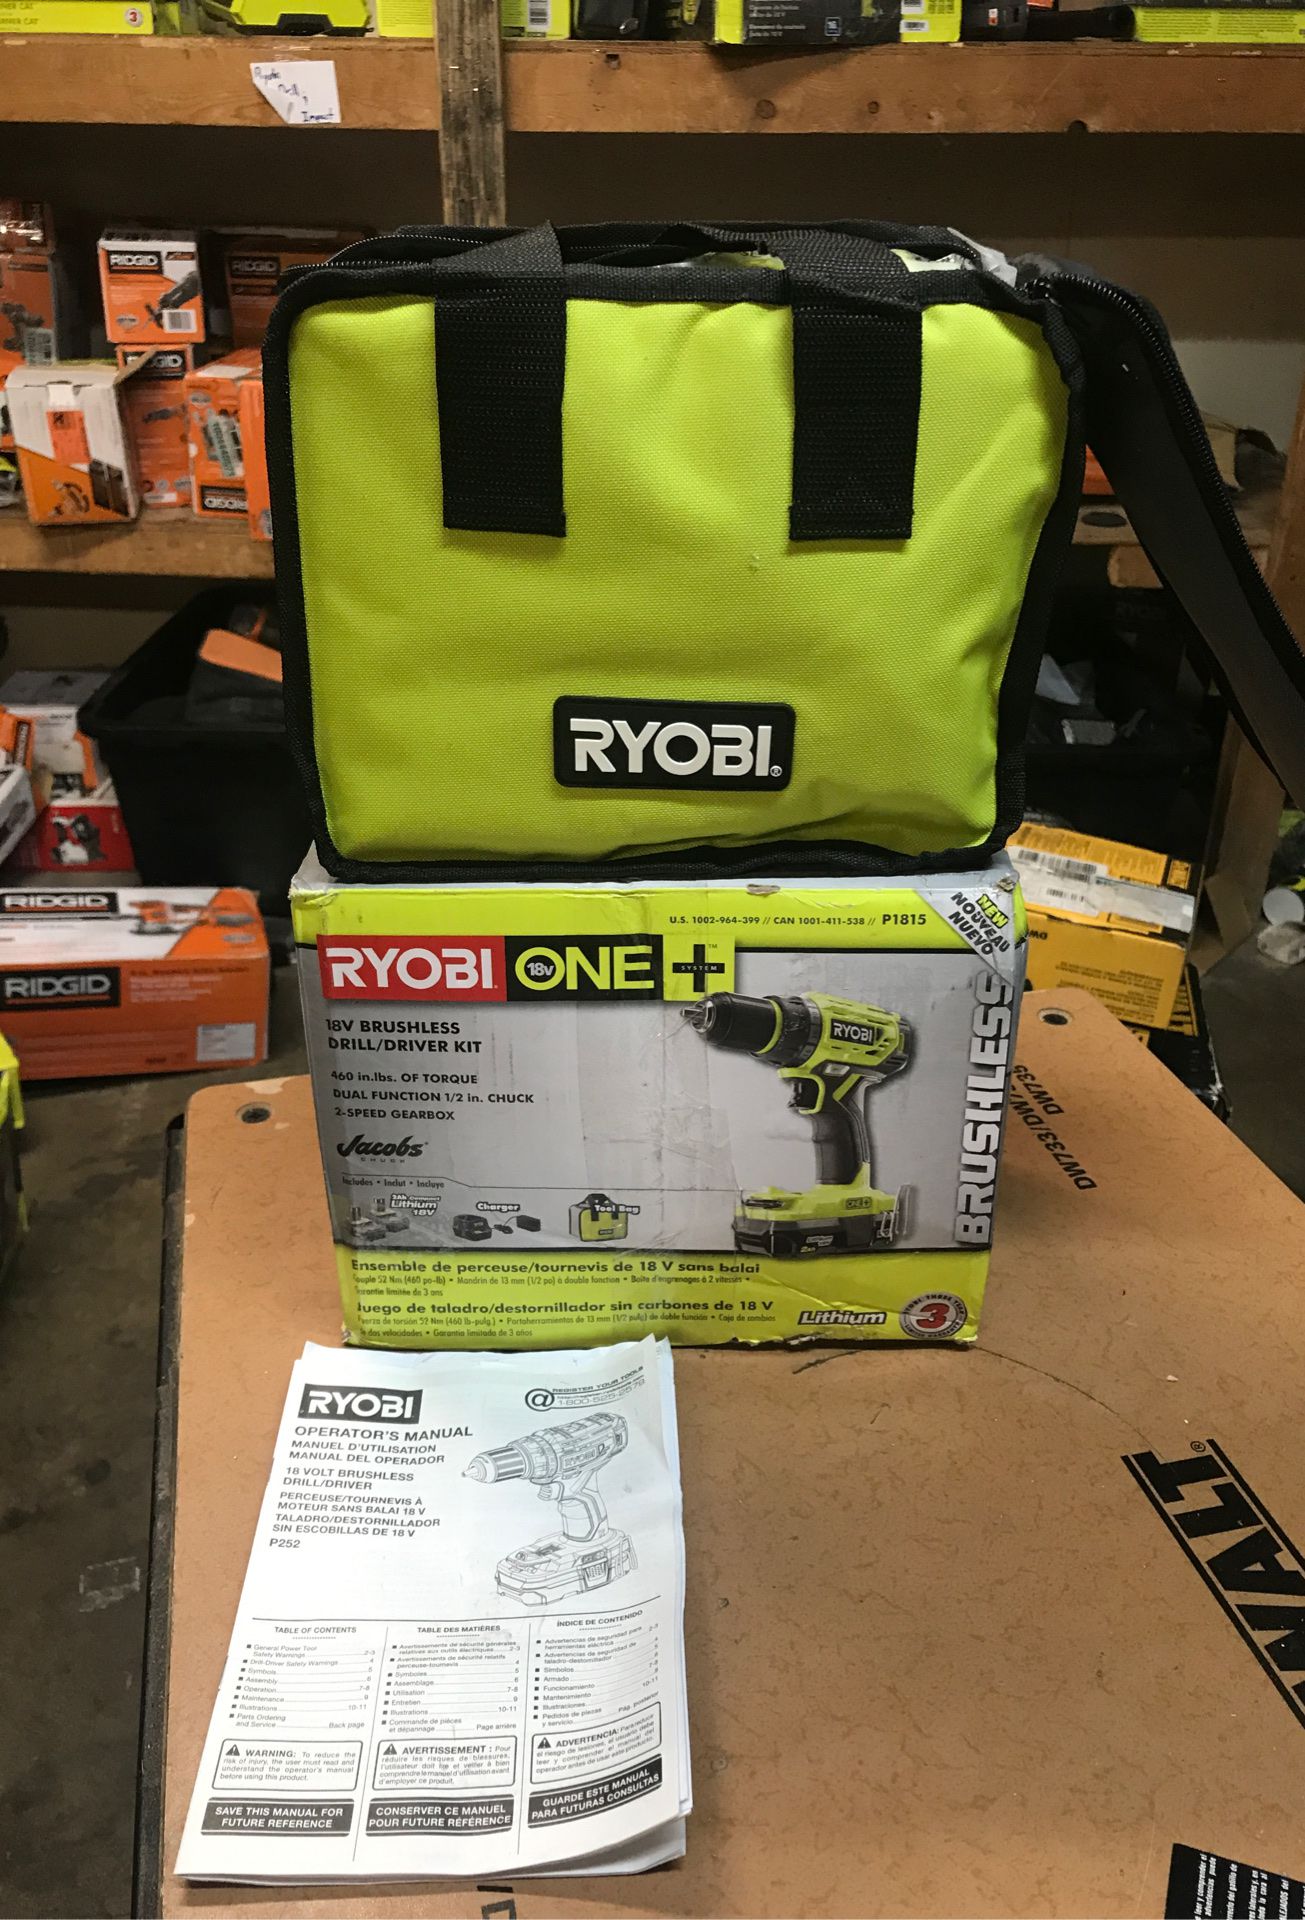 RYOBI 18-Volt ONE+ Lithium-Ion Cordless Brushless 1/2 in. Drill/driver with (2) 2.0 Ah Batteries, Charger, and Bag